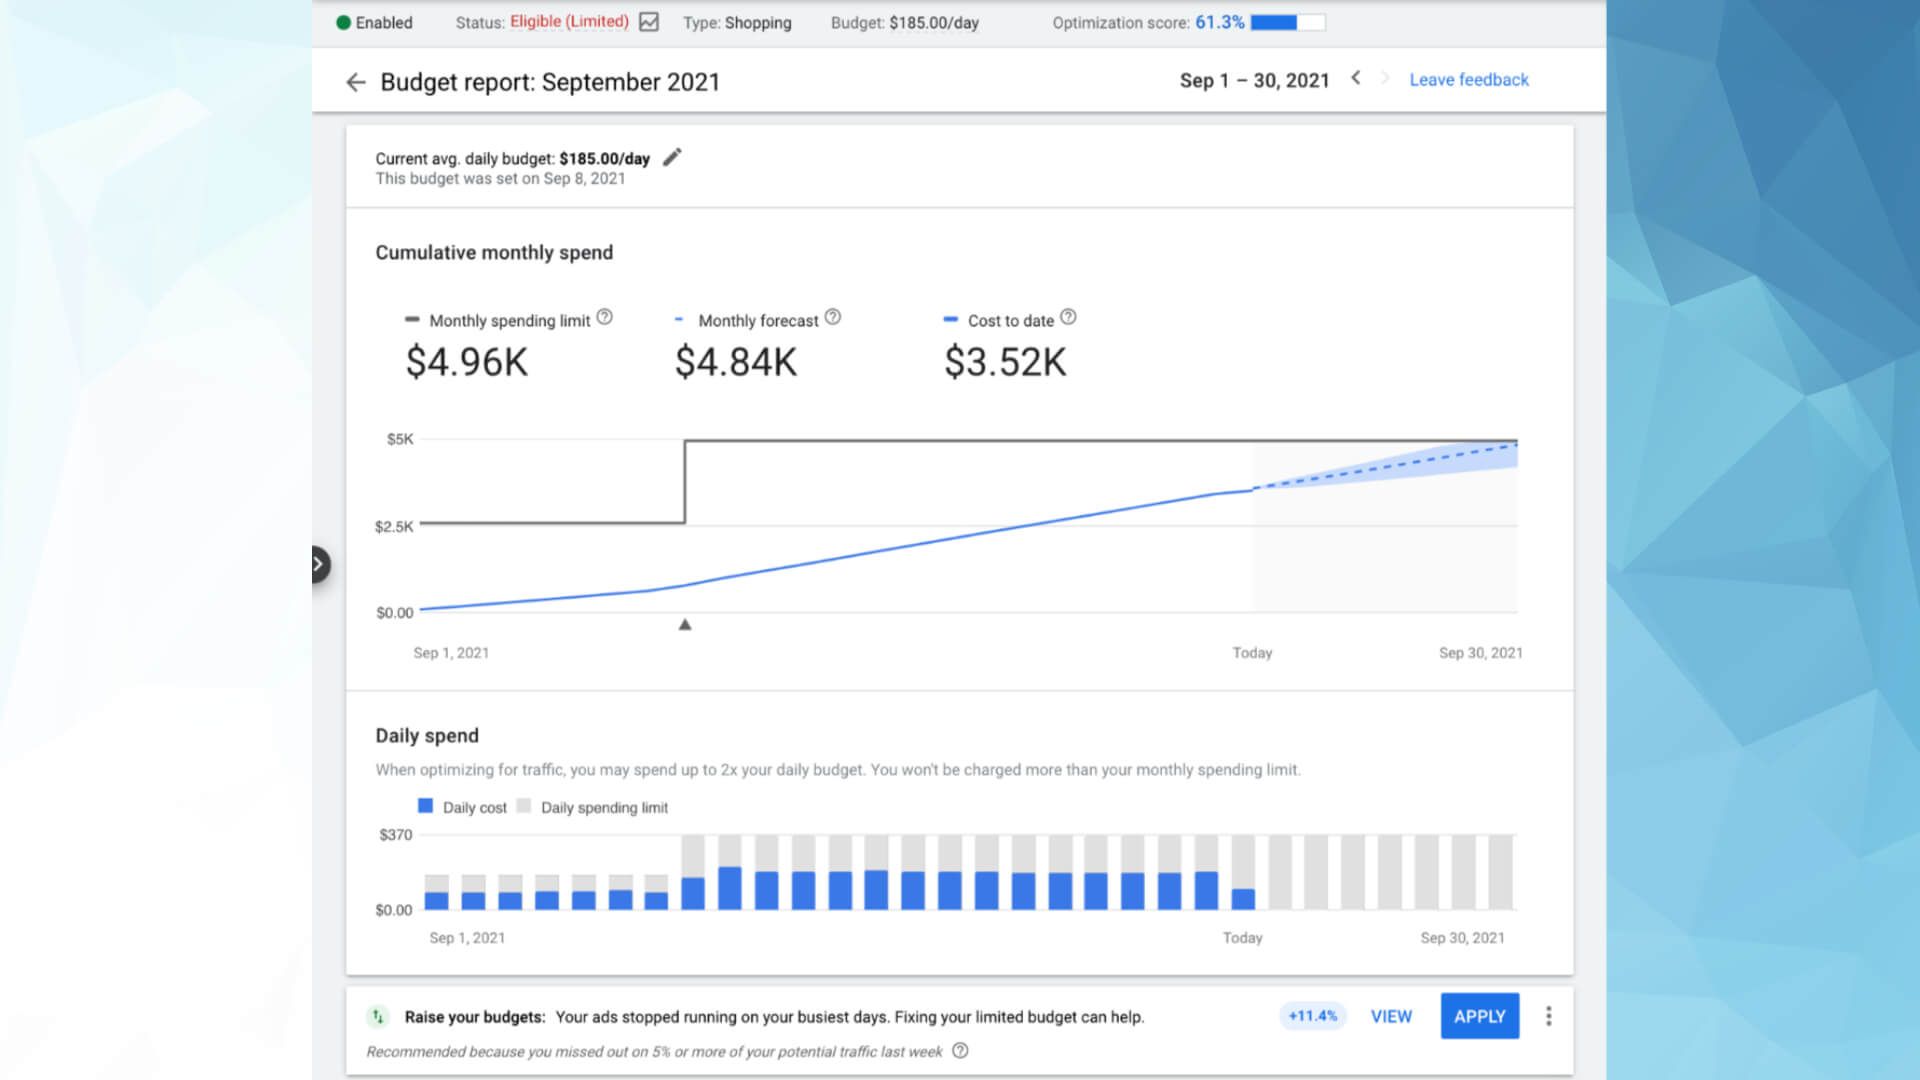 Google Ads launches new budget report